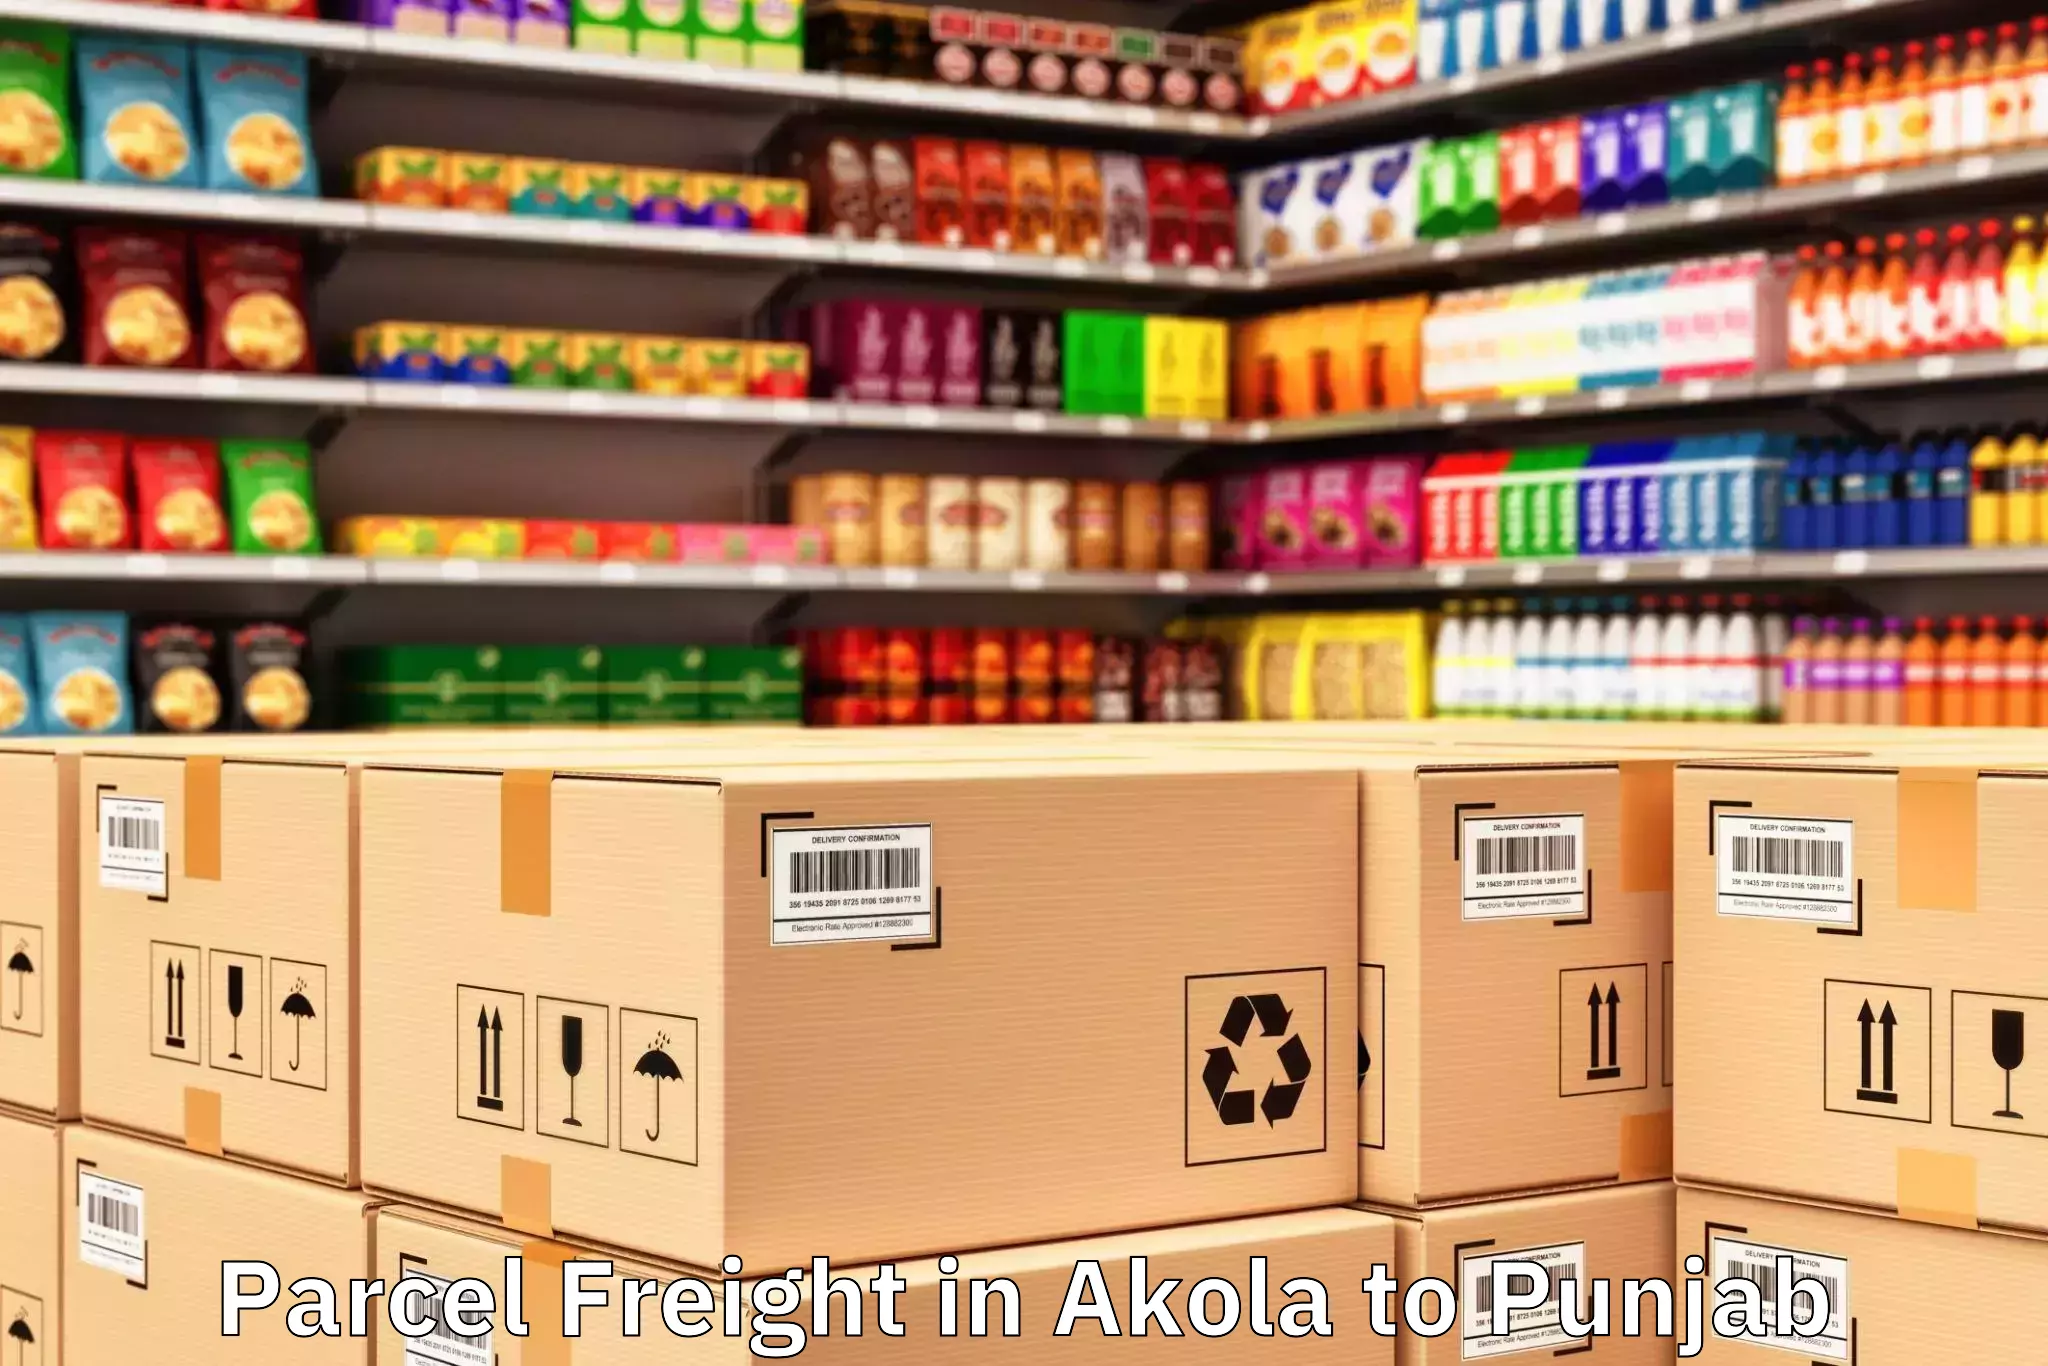 Top Akola to Bhatinda Airport Bup Parcel Freight Available